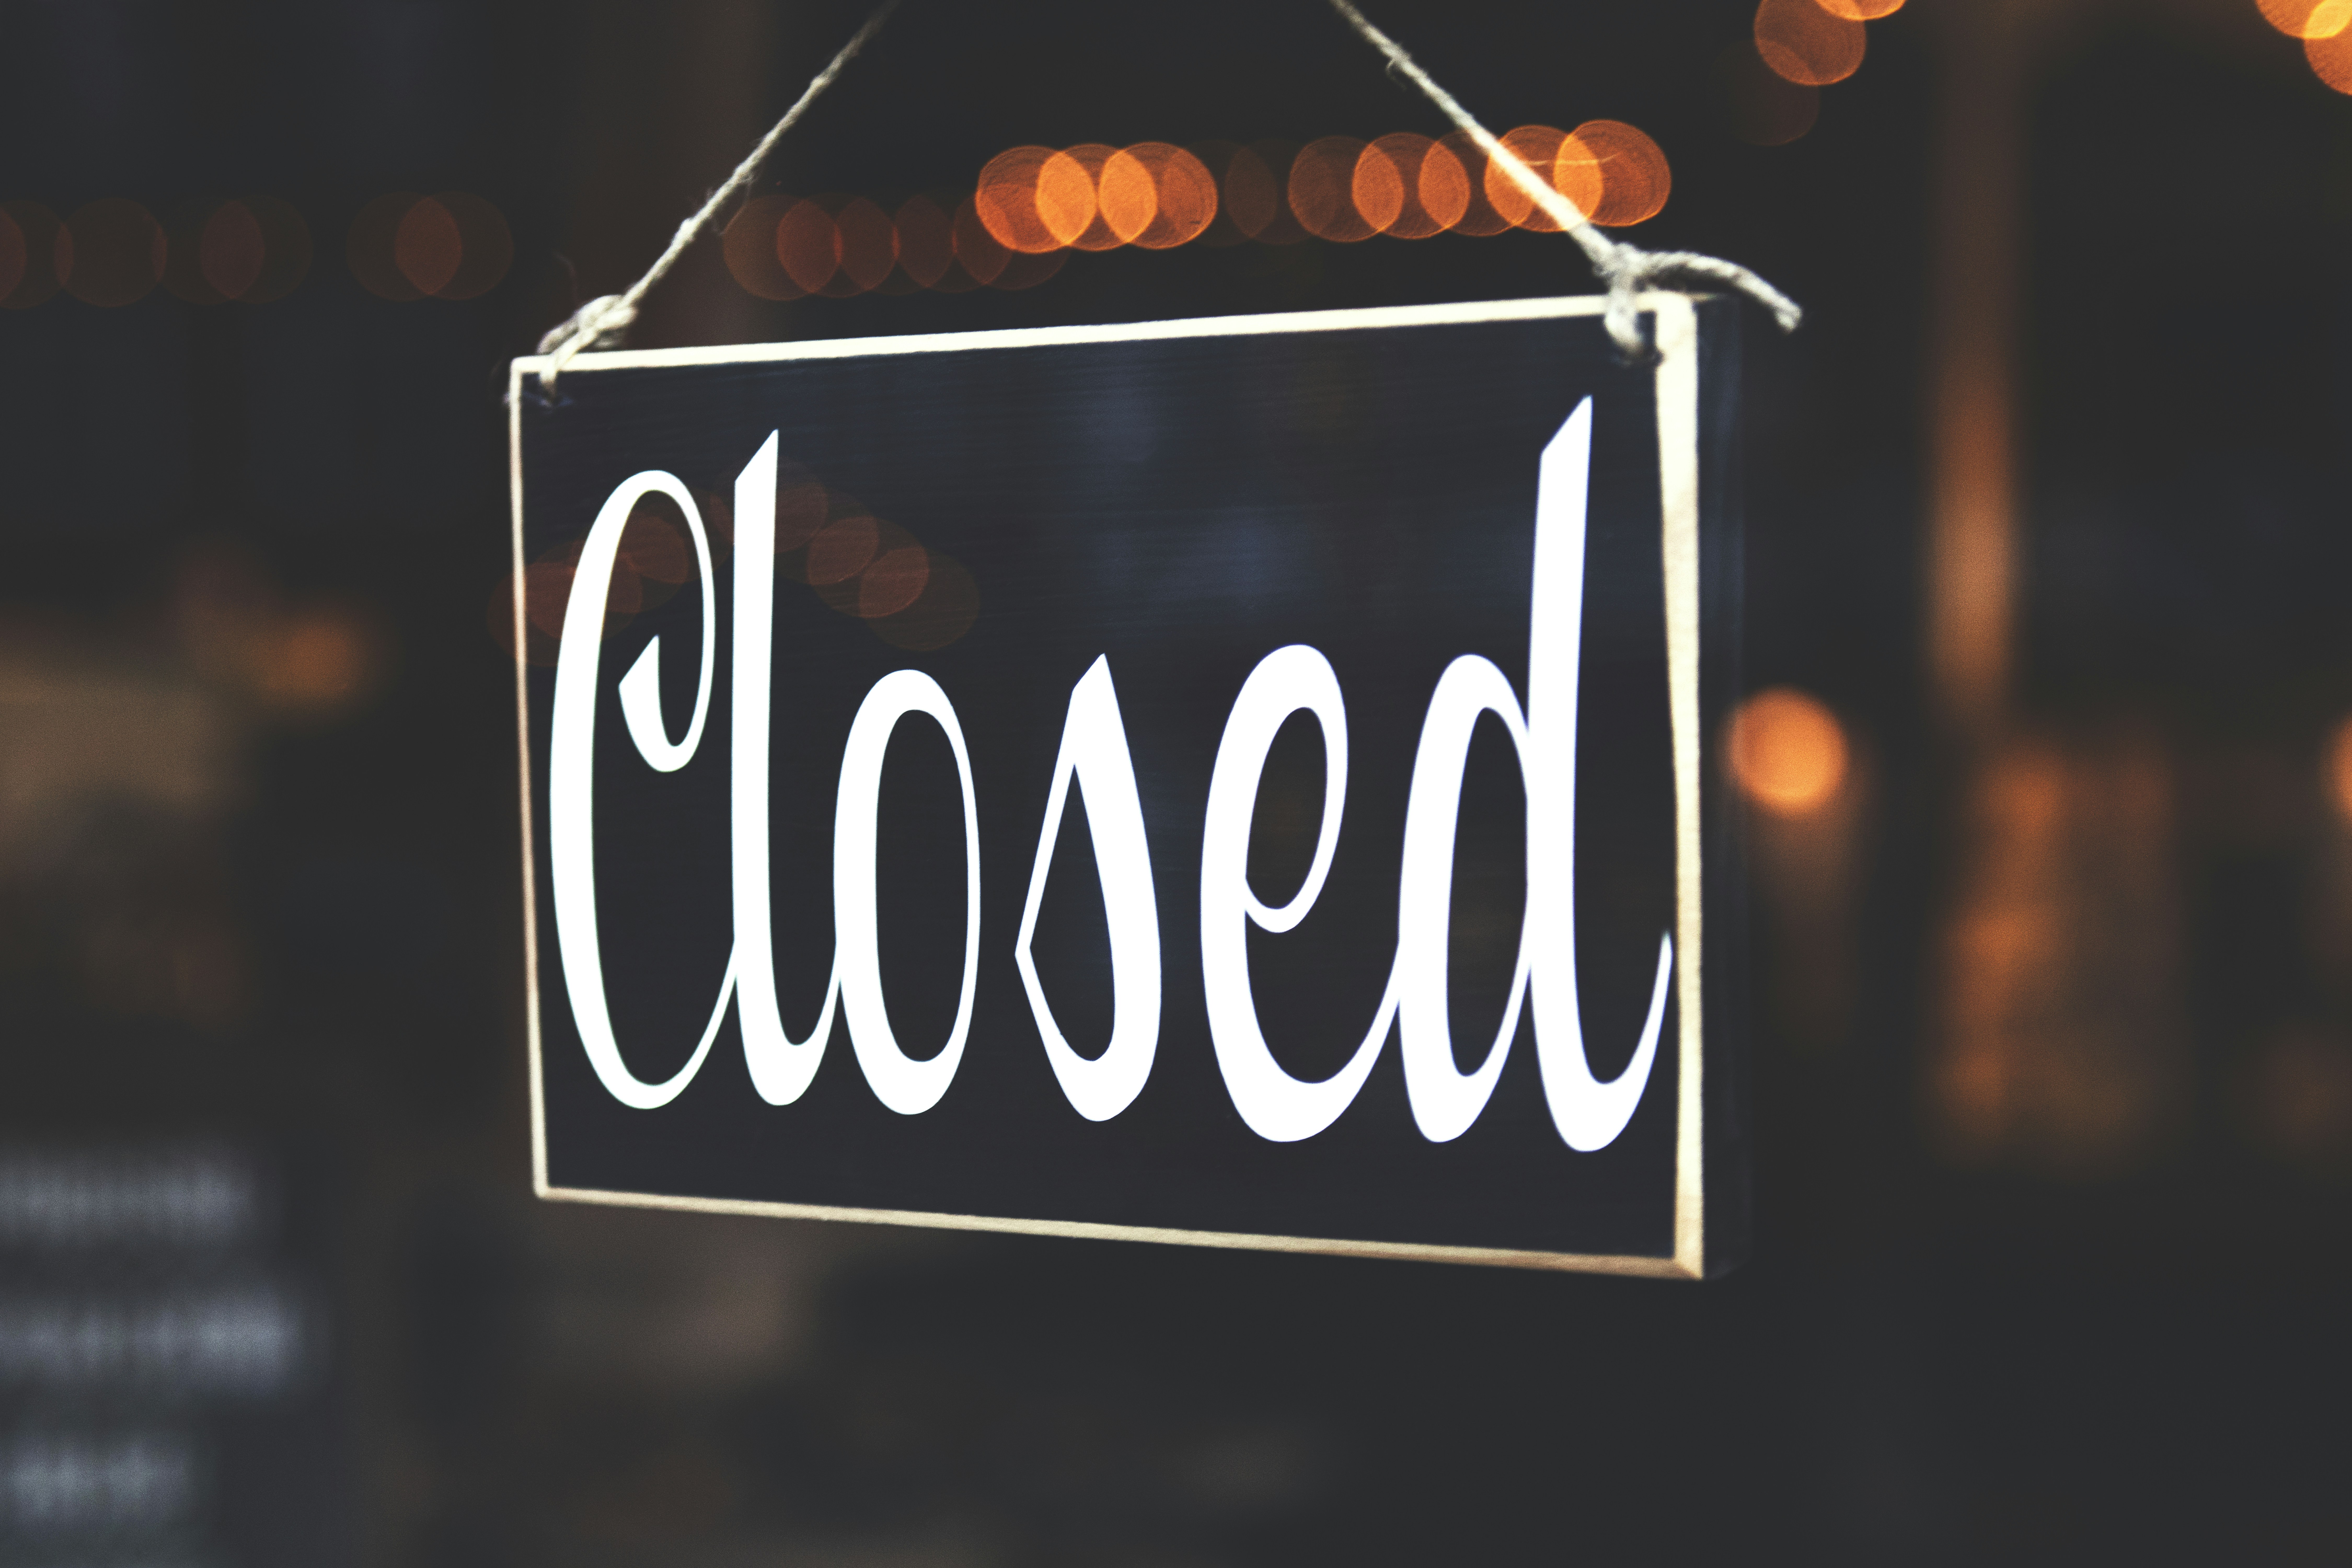 Closing Your Failed Business - Difficult But Necessary